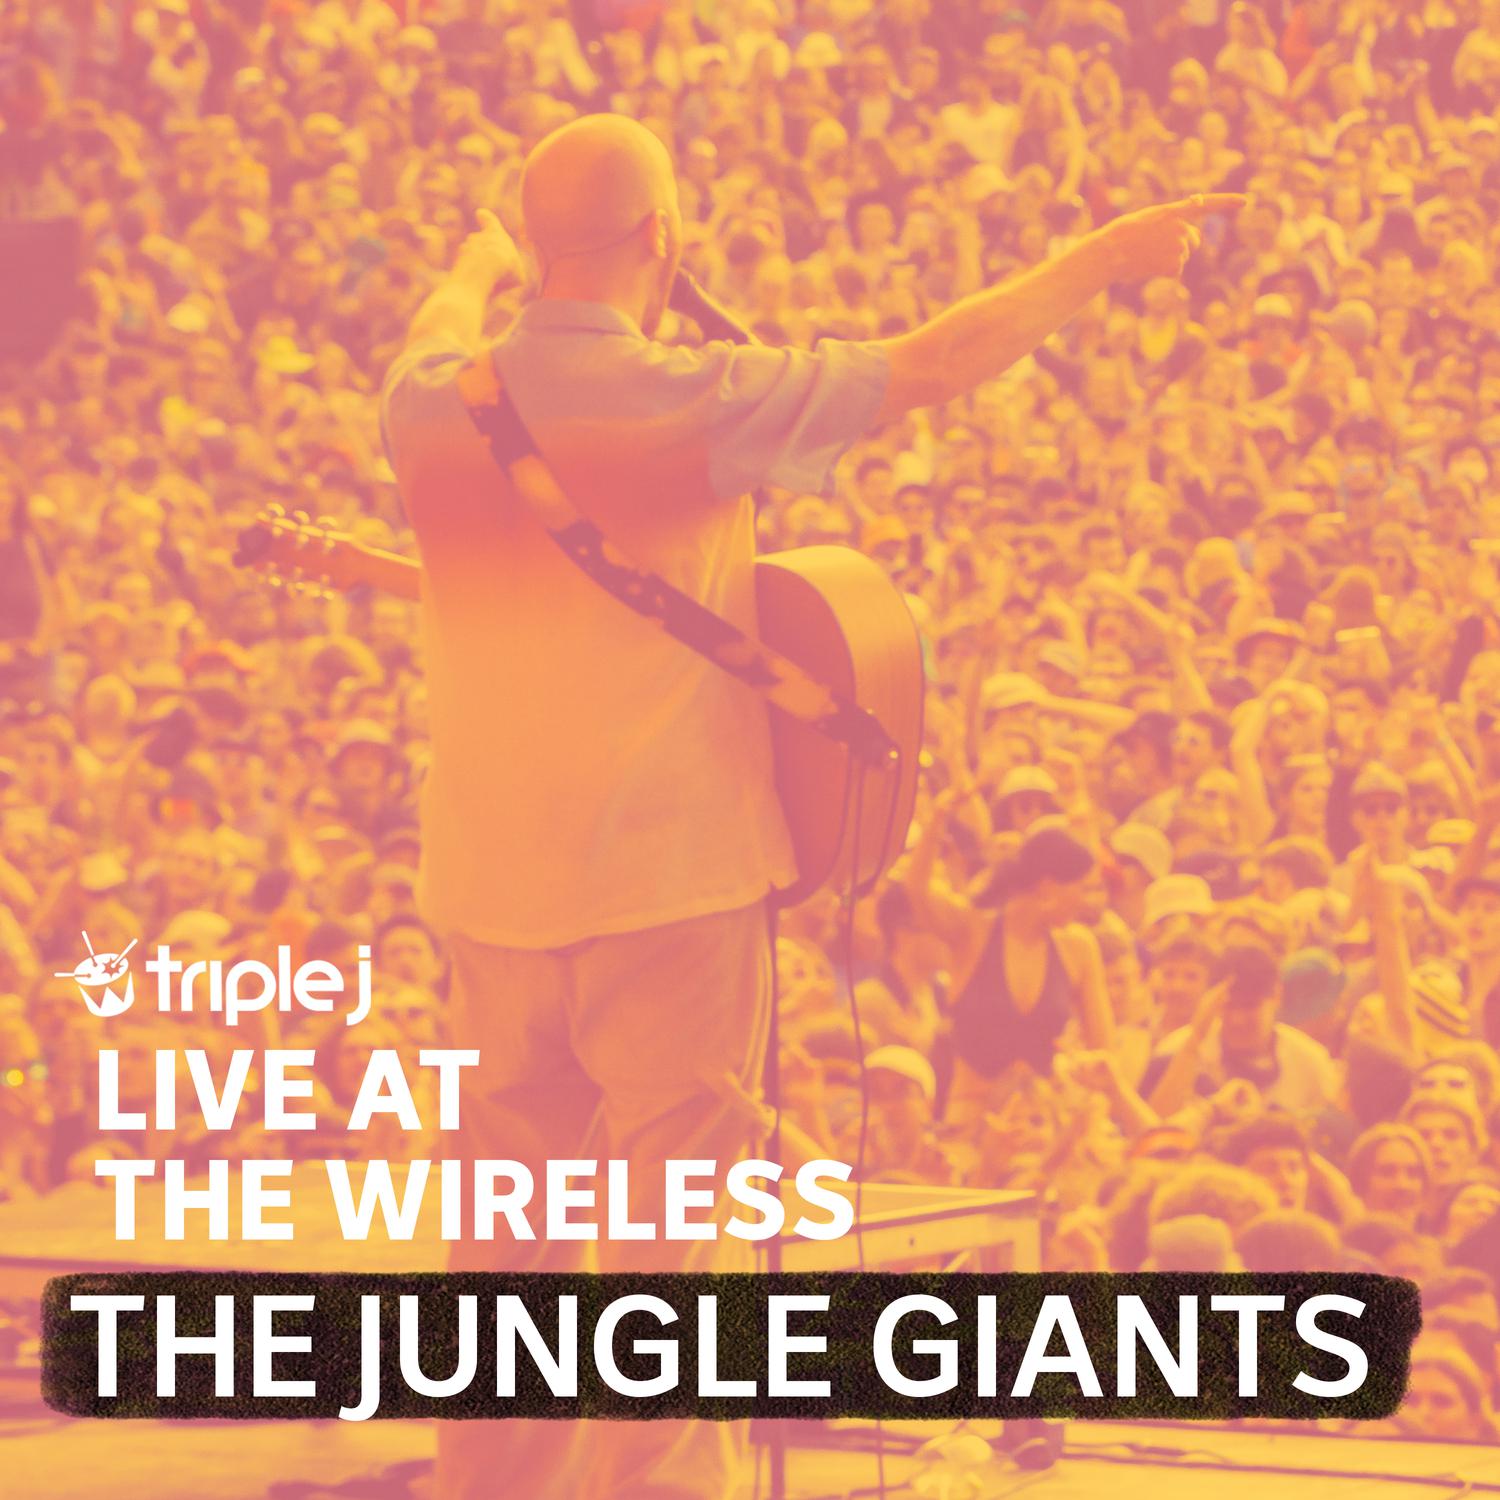 The Jungle Giants - Bad Dream (triple j Live At The Wireless)